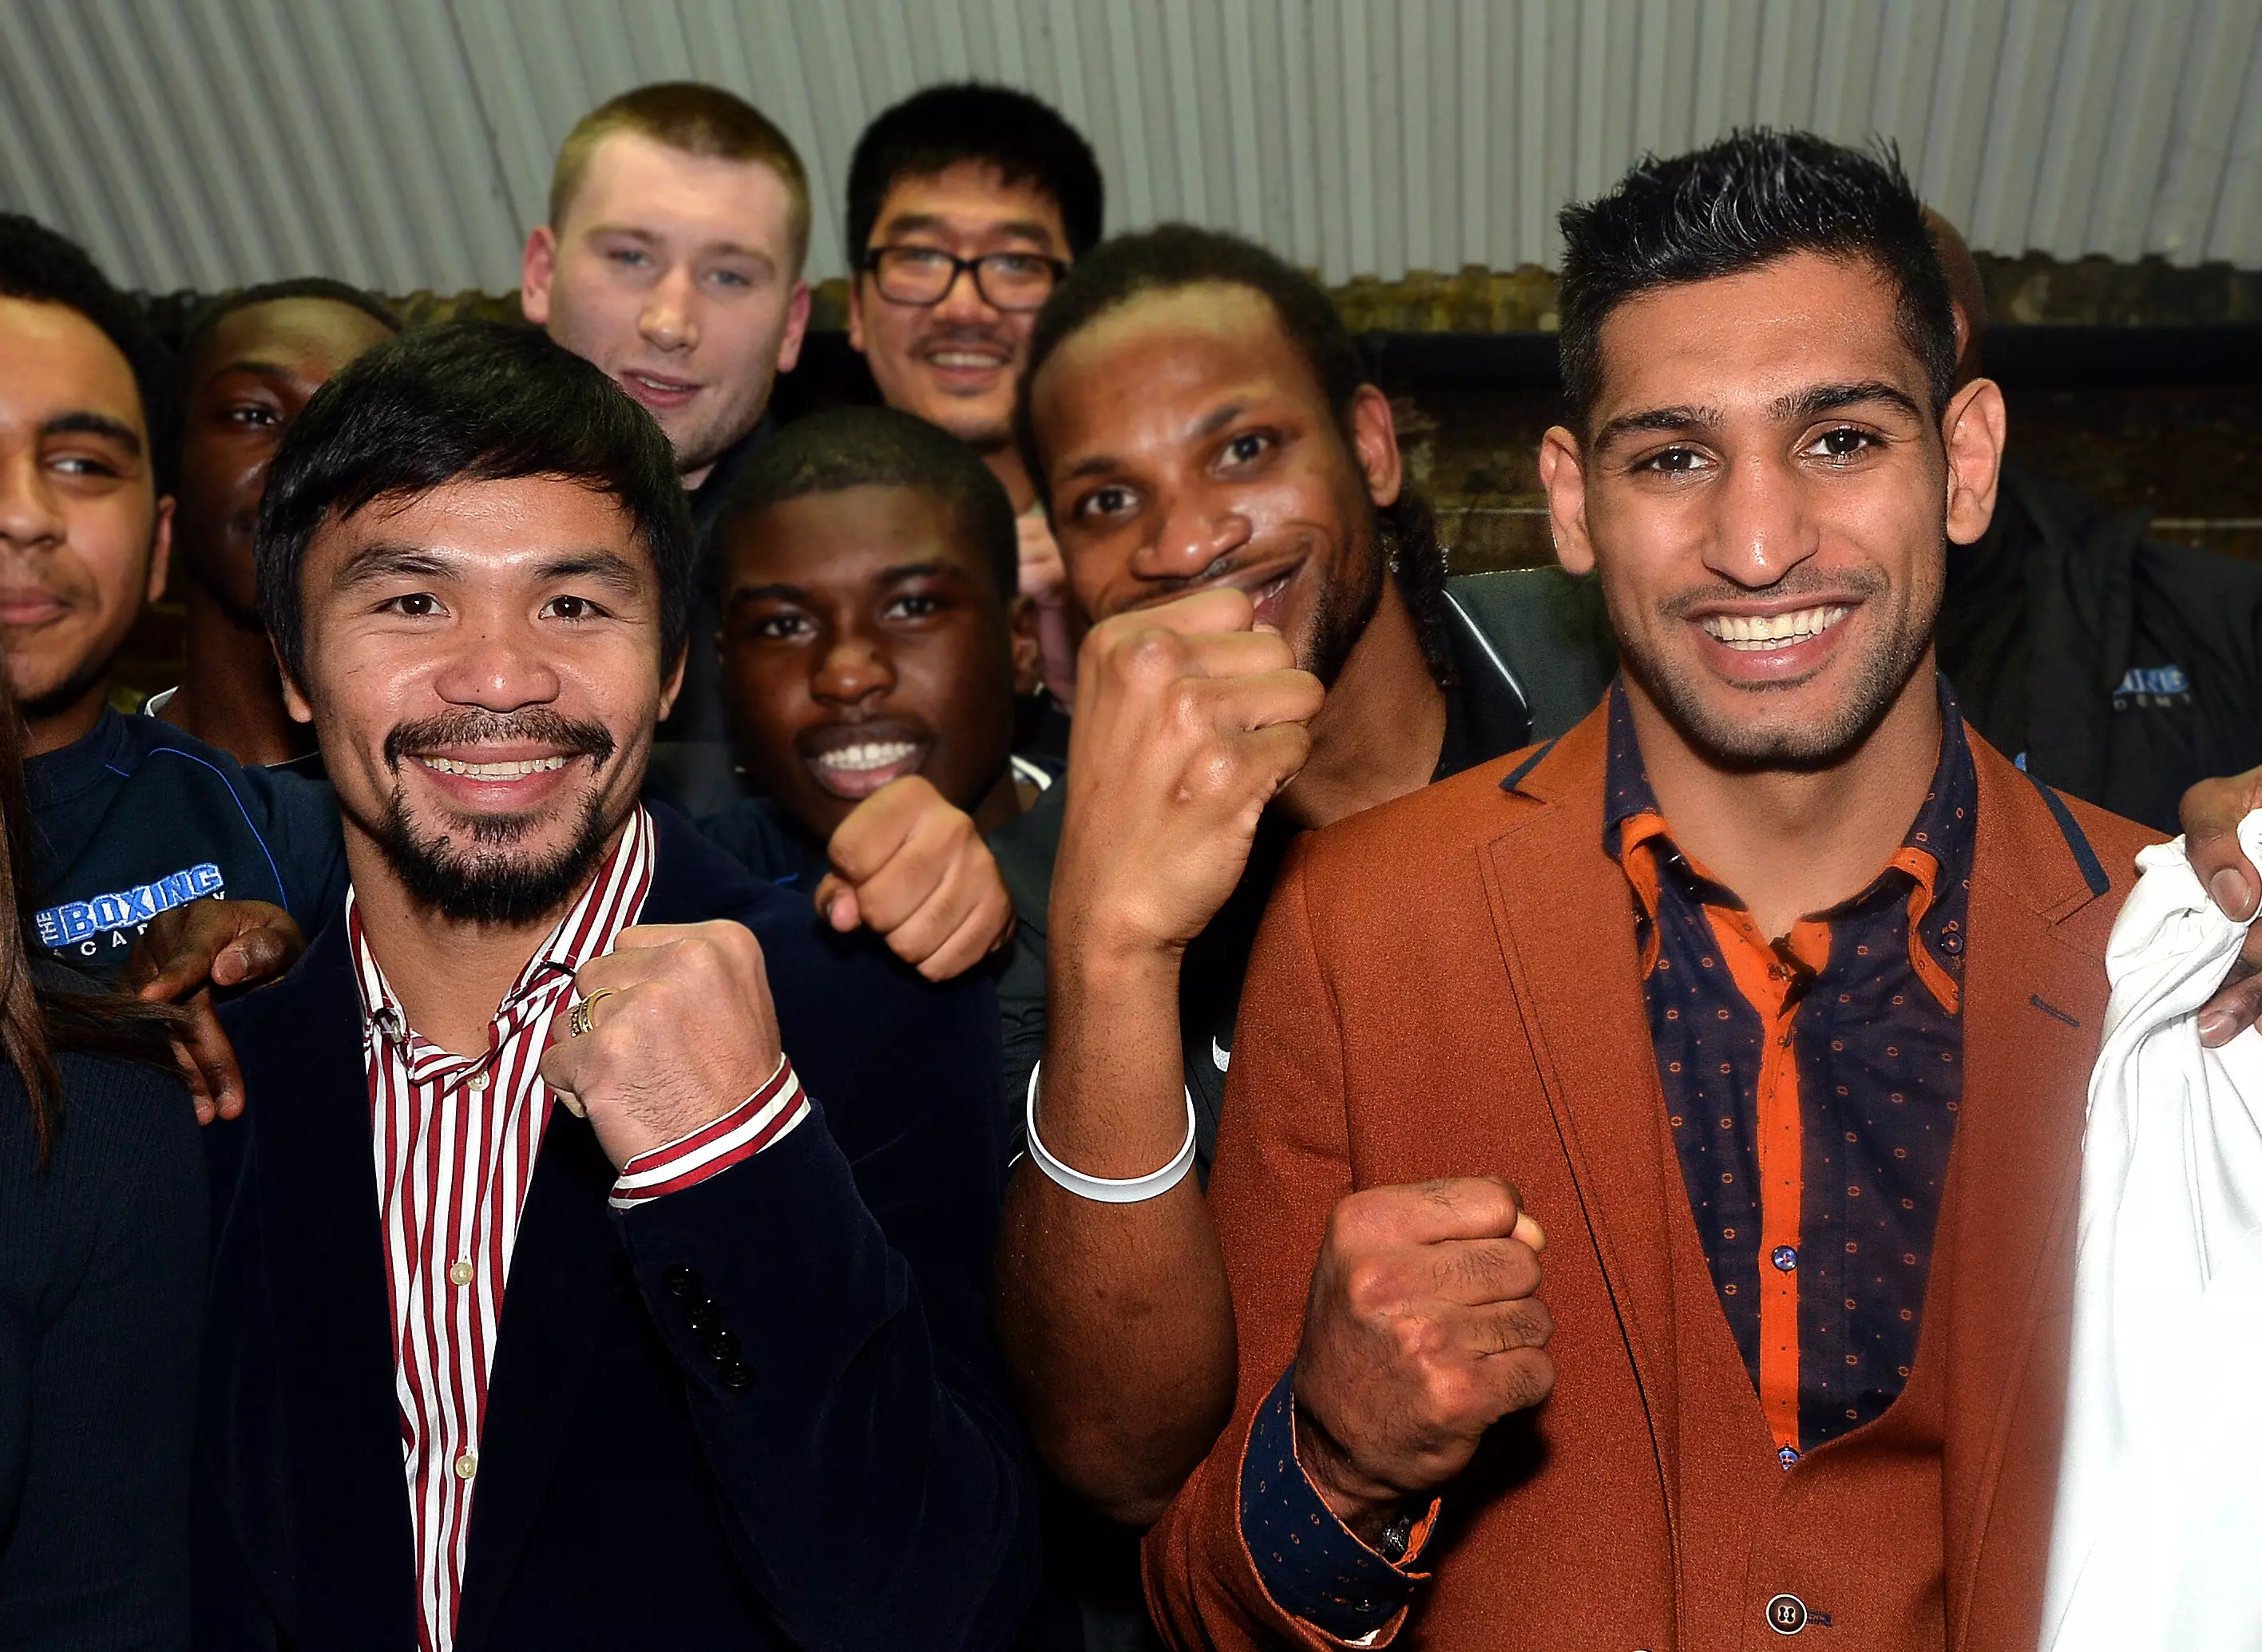 BREAKING: Manny Pacquiao Vs. Amir Khan Set To Fight On April 23rd 